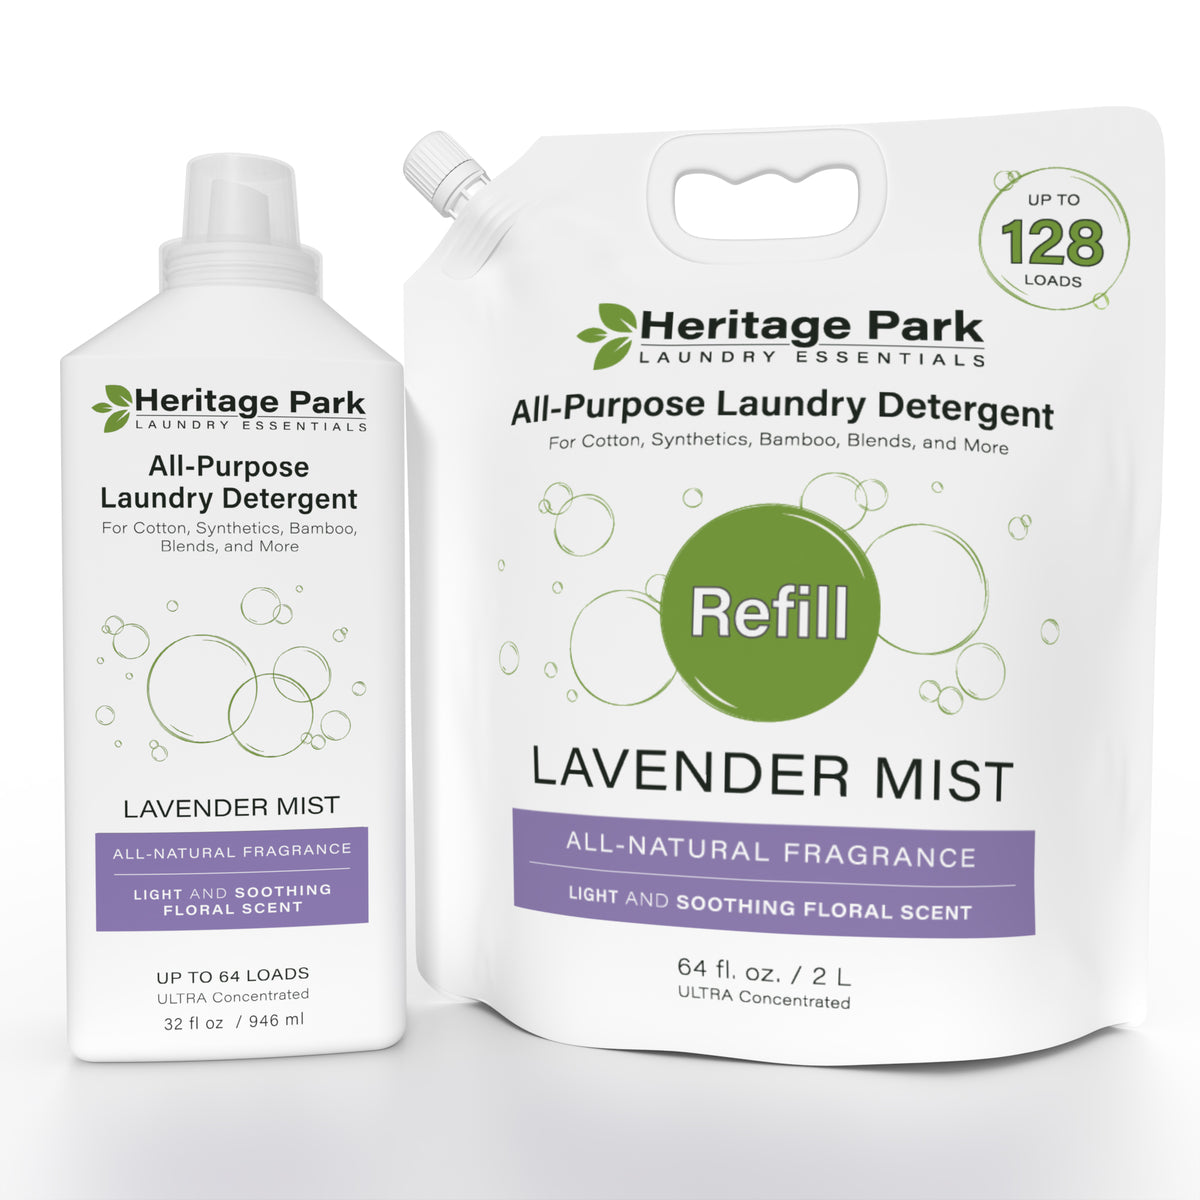 All About Hypoallergenic Laundry Detergent from Heritage Park